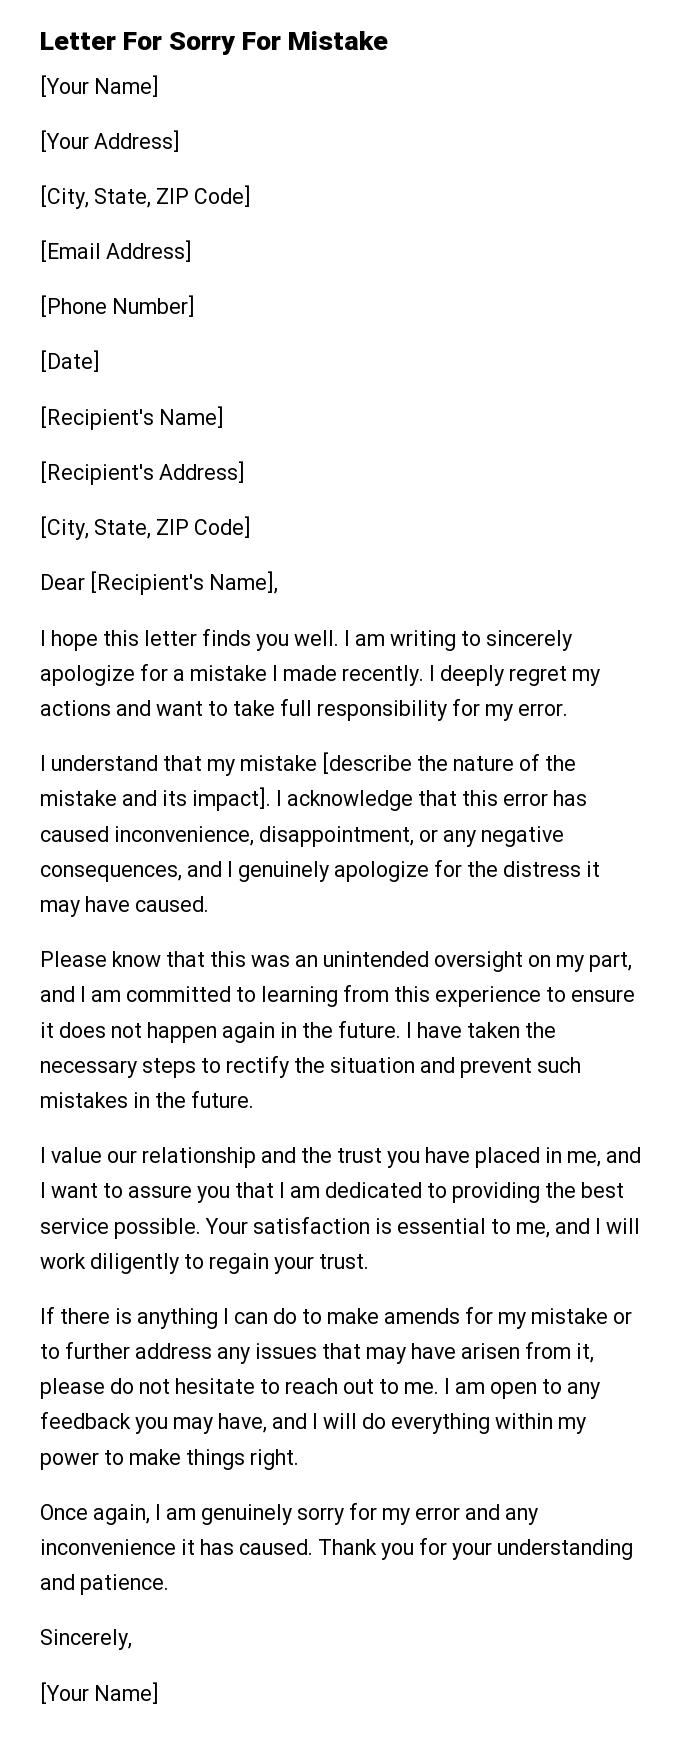 Letter For Sorry For Mistake